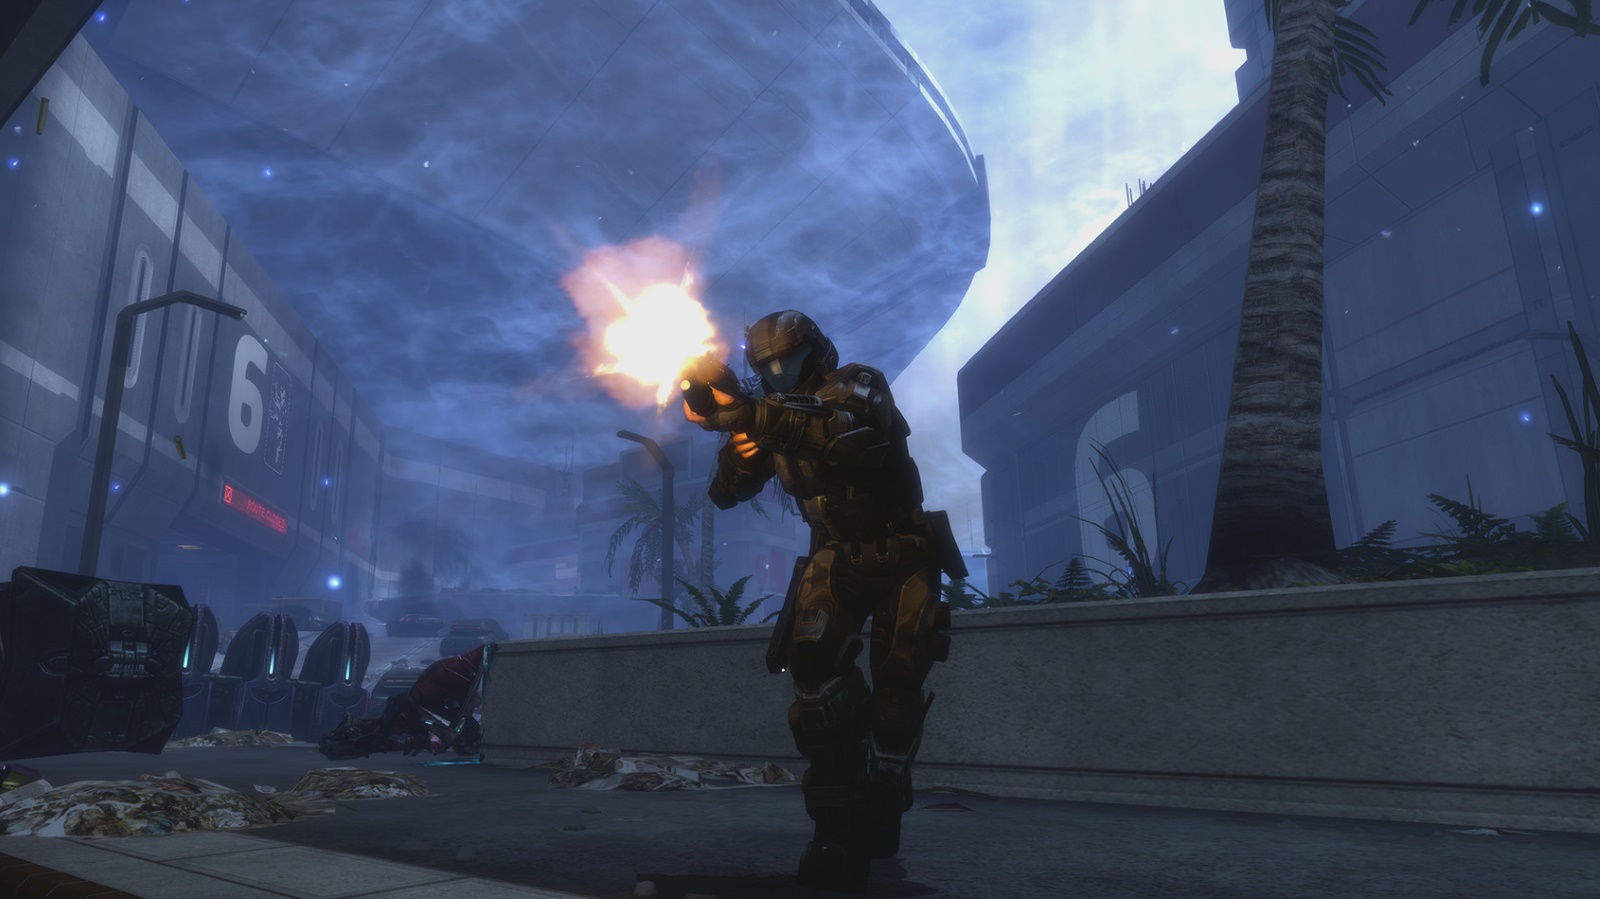 Halo The Master Chief Collection taking PC beta signups now